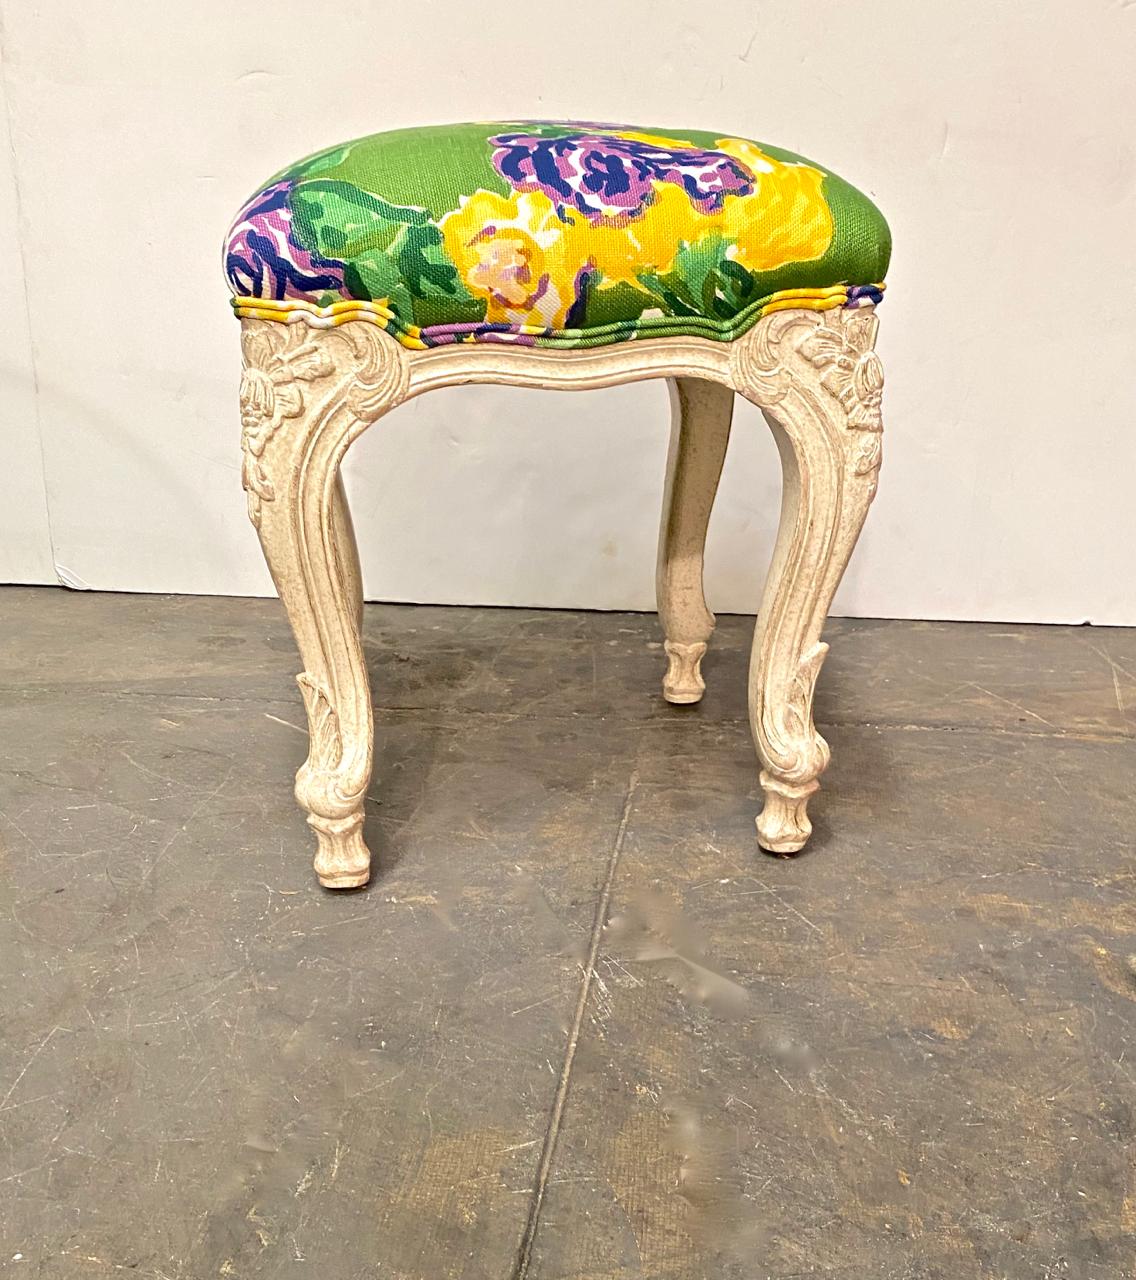 This is a beefy well-carved set of three Louis XV style tabourets/stools. The upholstery features a bold tropical patterned printed linen that bring Miami-style to mind. These three stools would make a statement placed at the end of a bed or in